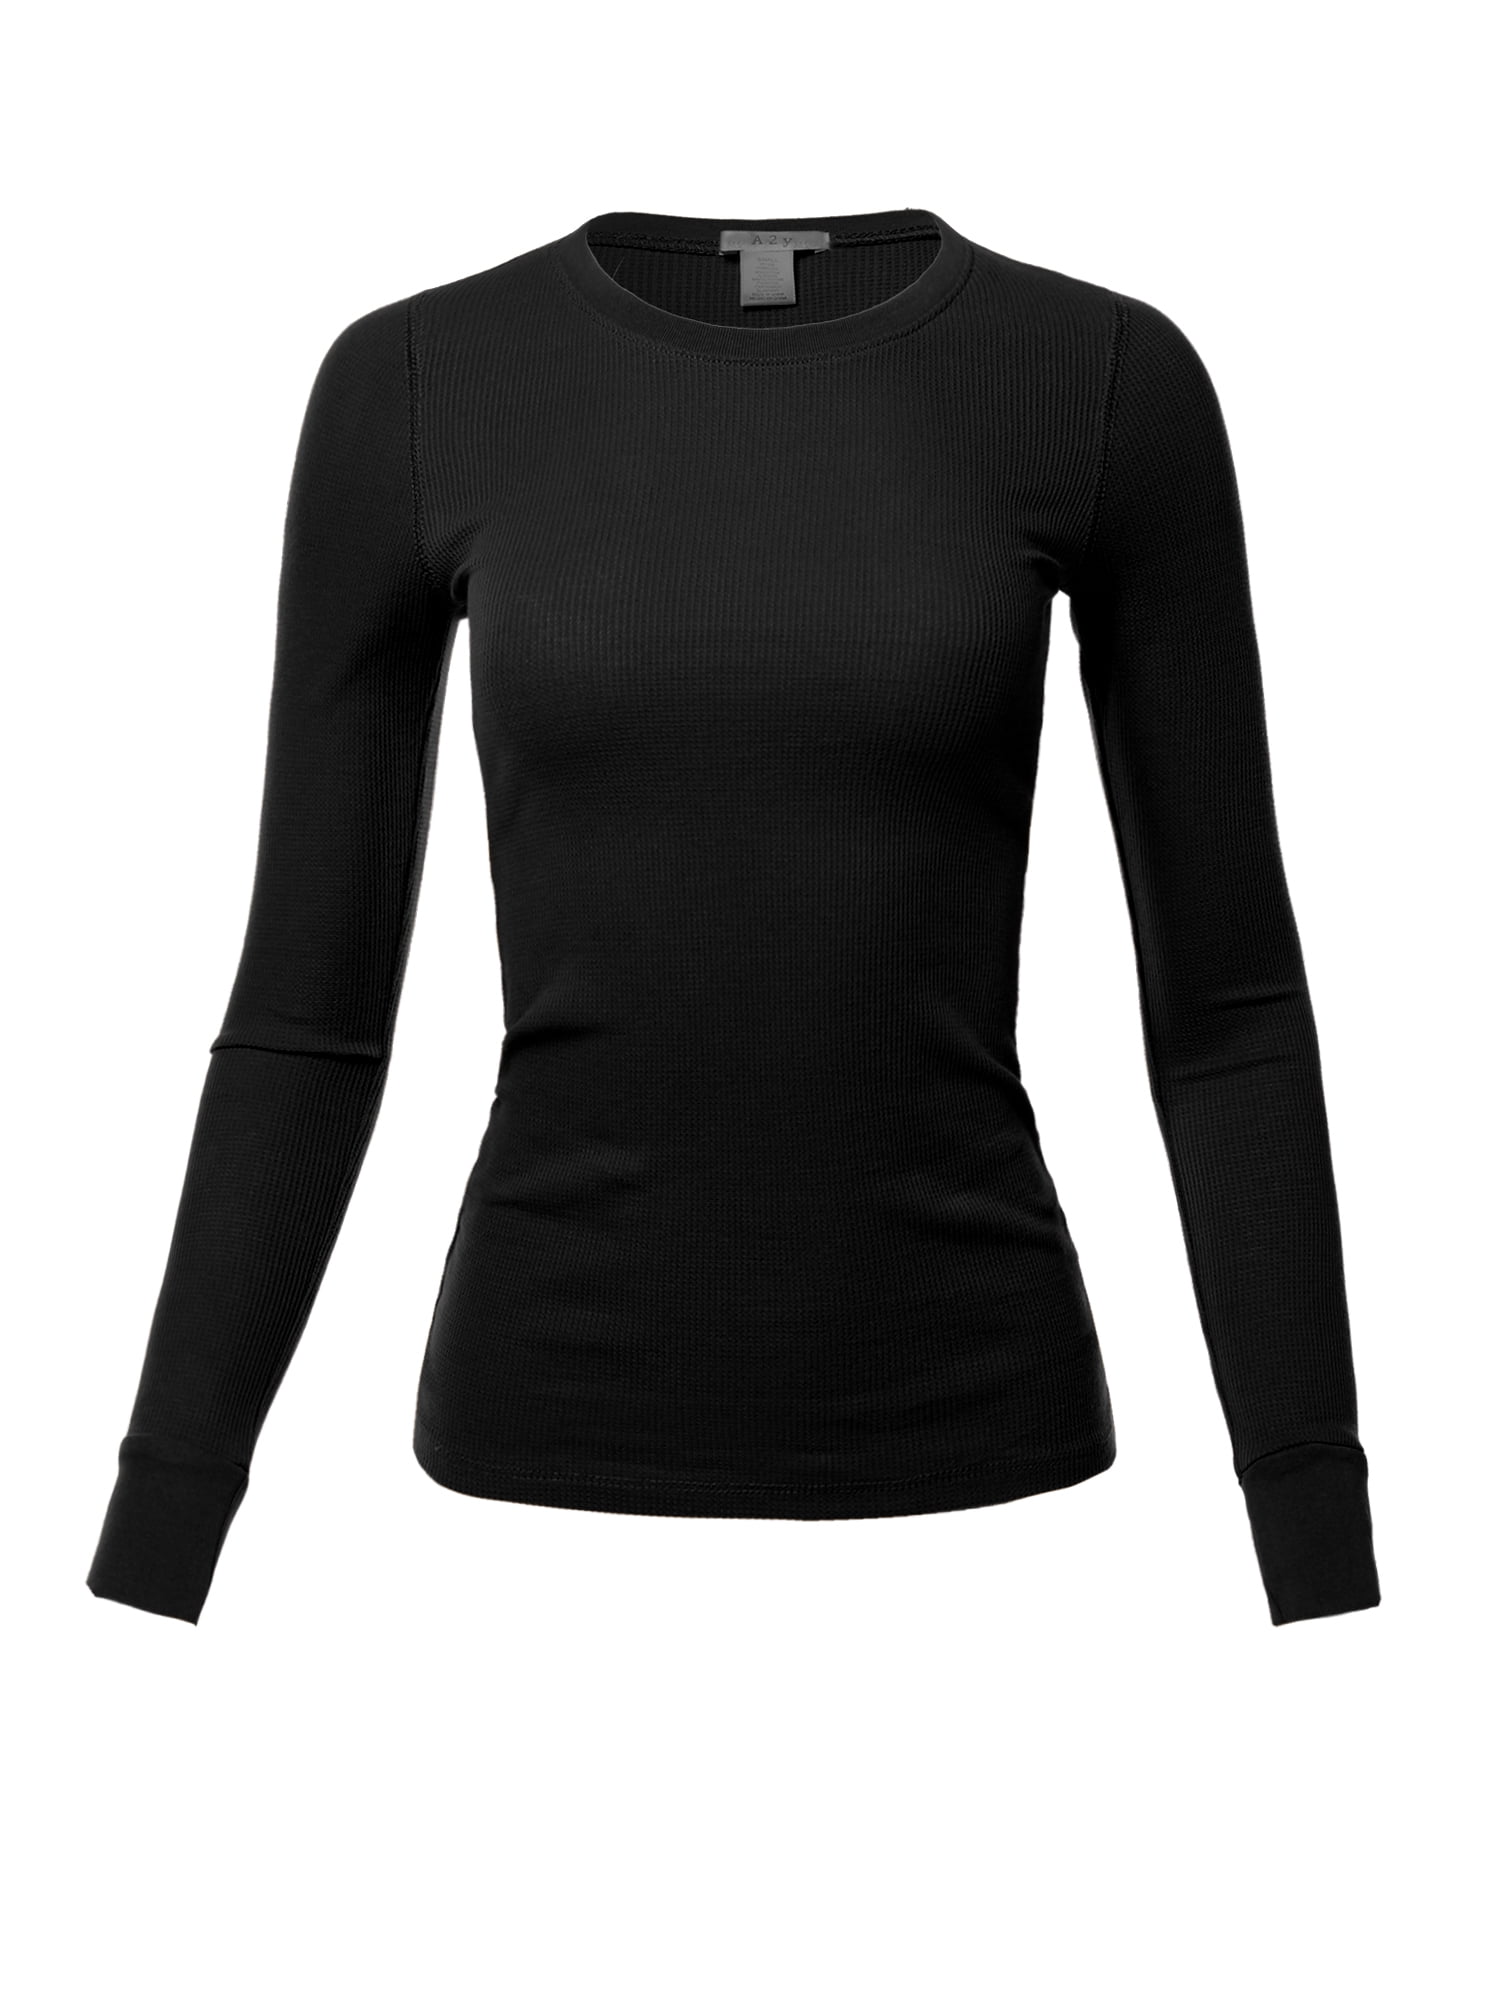 A2y A2y Womens Basic Solid Fitted Long Sleeve Crew Neck Thermal Top Shirt Black M Walmart 